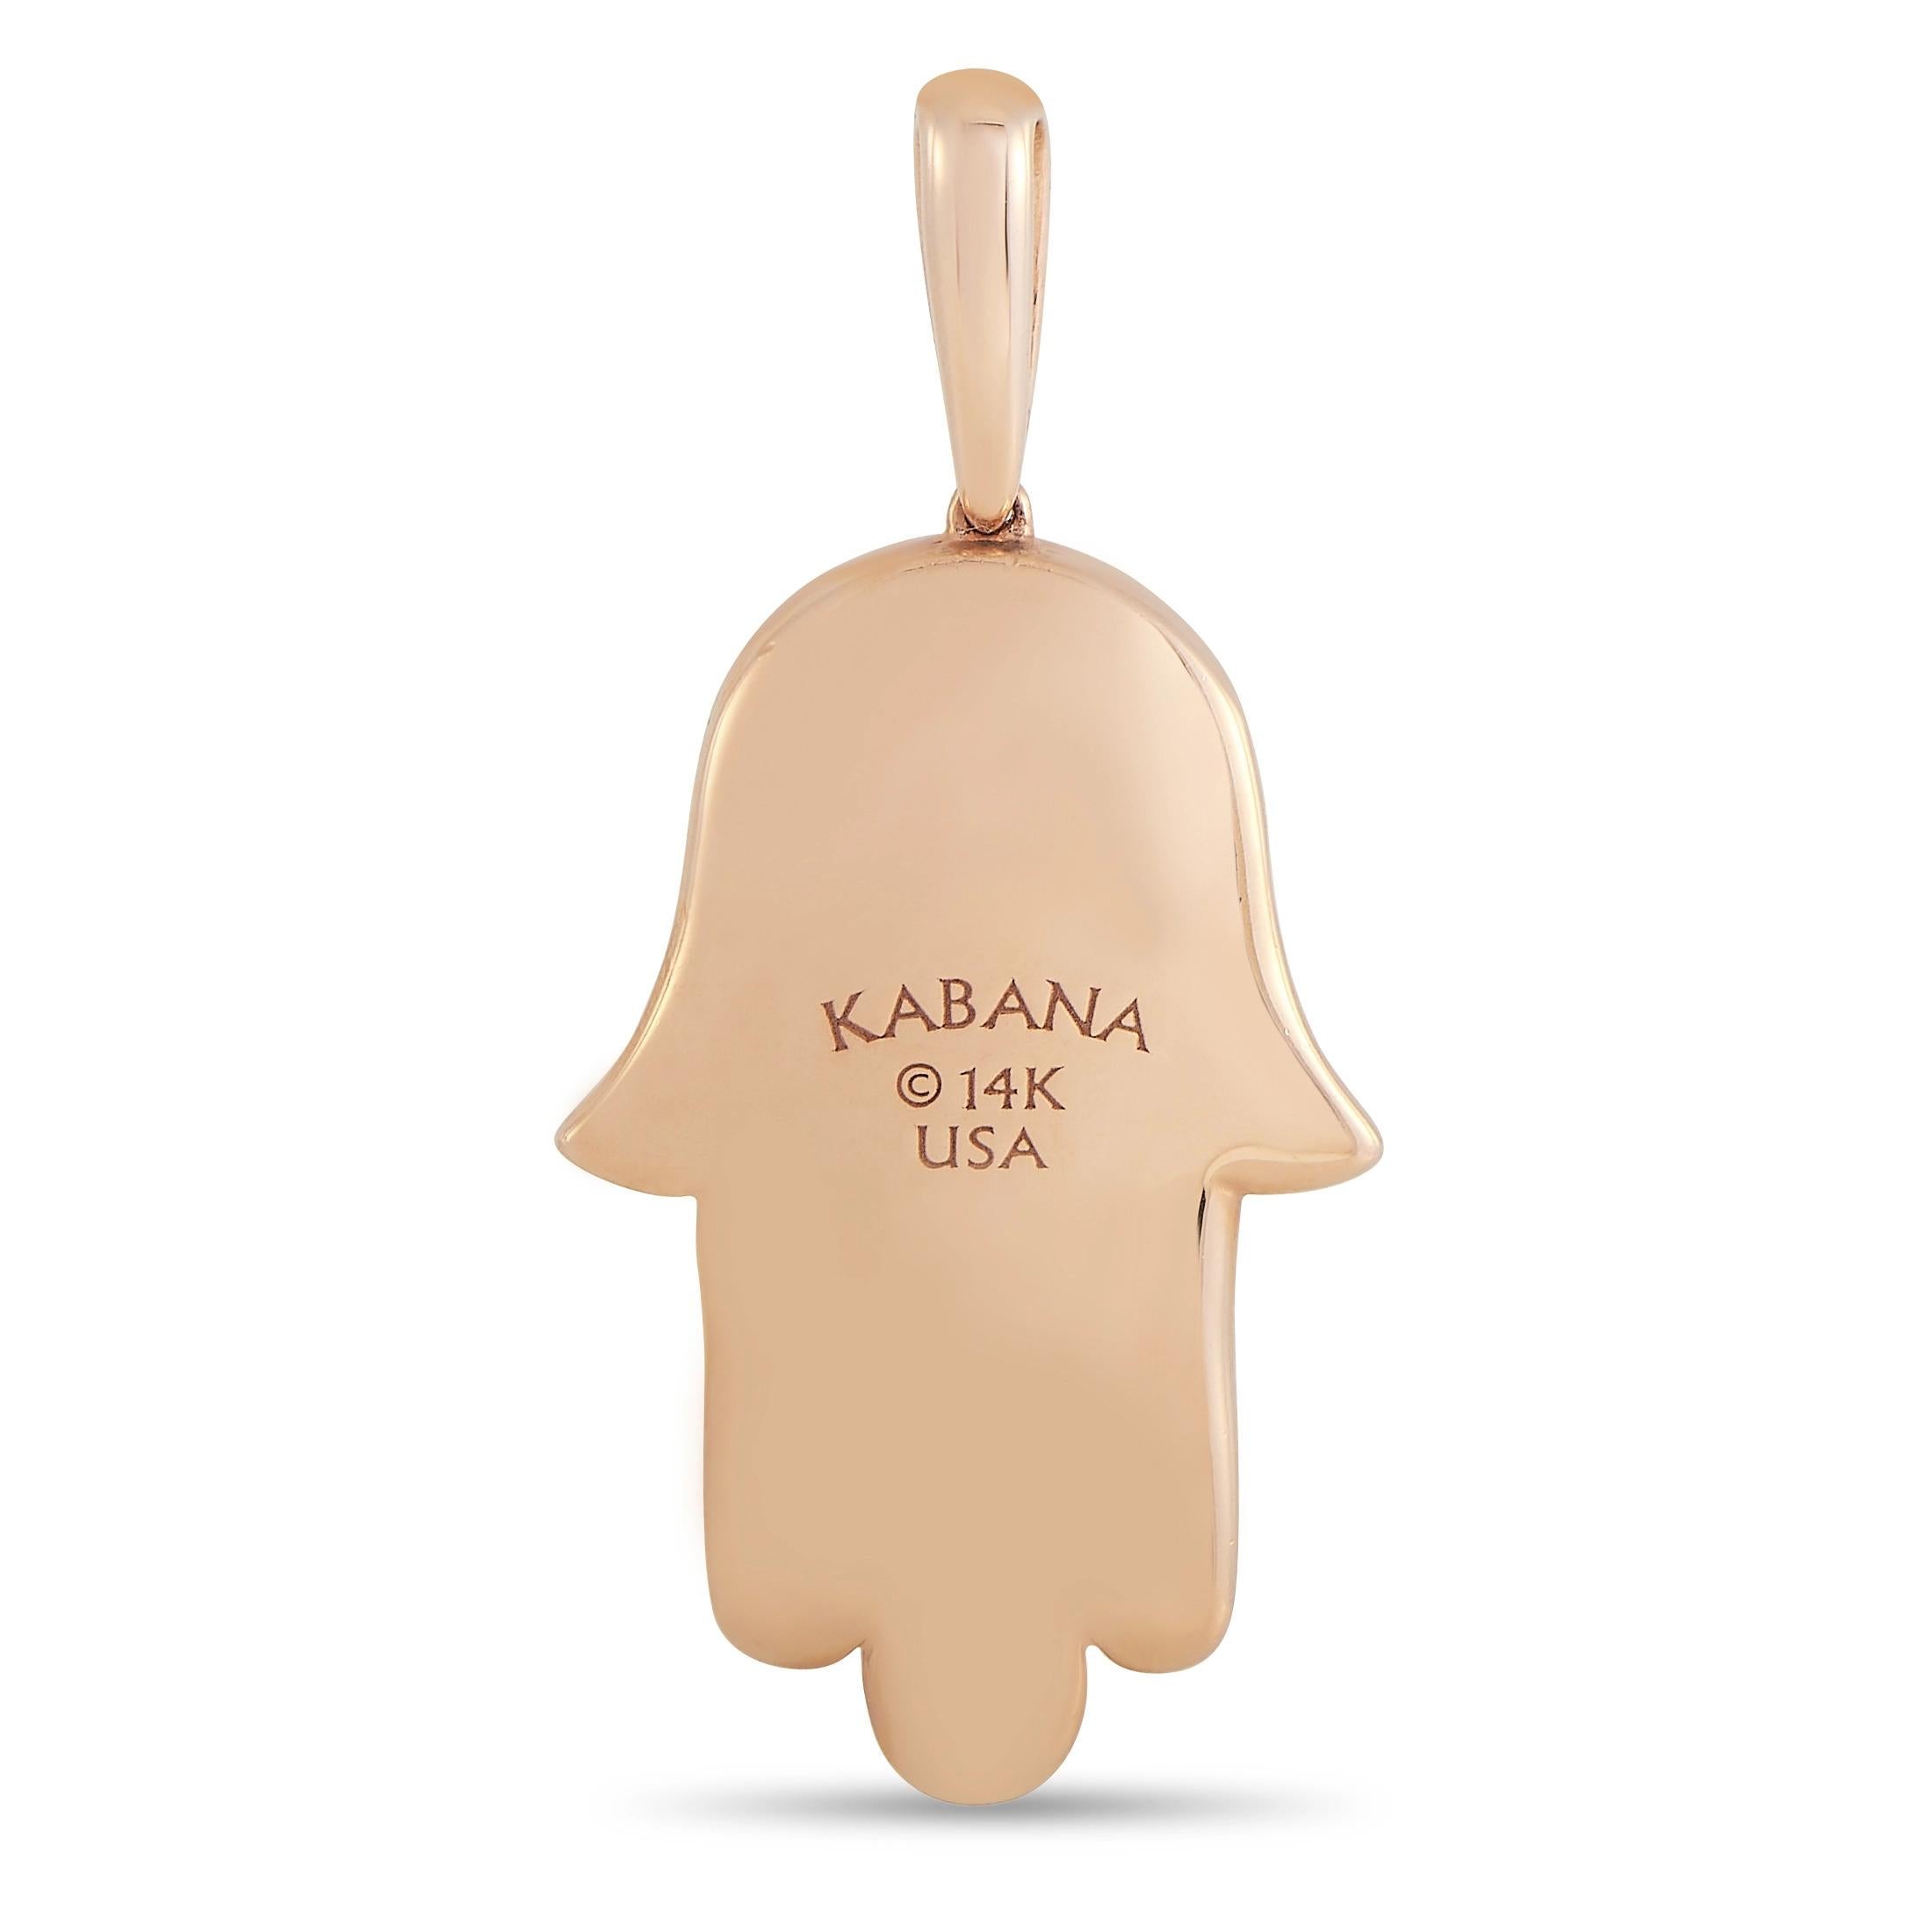 This beautiful Kabana 14K Rose Gold 0.33 ct Diamond and Mother of Pearl Hamsa Pendant is made with warm 14K rose gold. The pendant is set with 0.33 carats of small round-cut diamonds and inlaid with a mother of pearl in a soft pink color. The